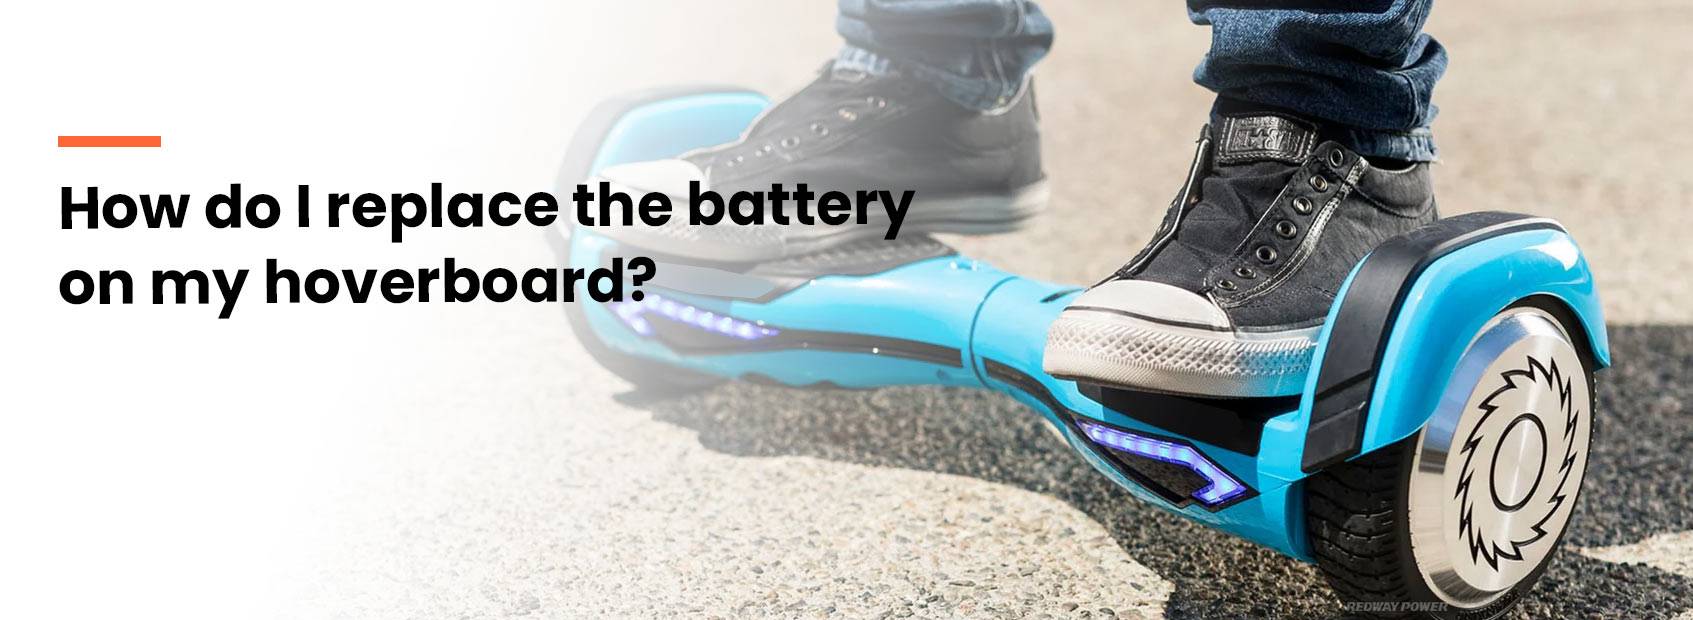 How do I replace the battery on my hoverboard?